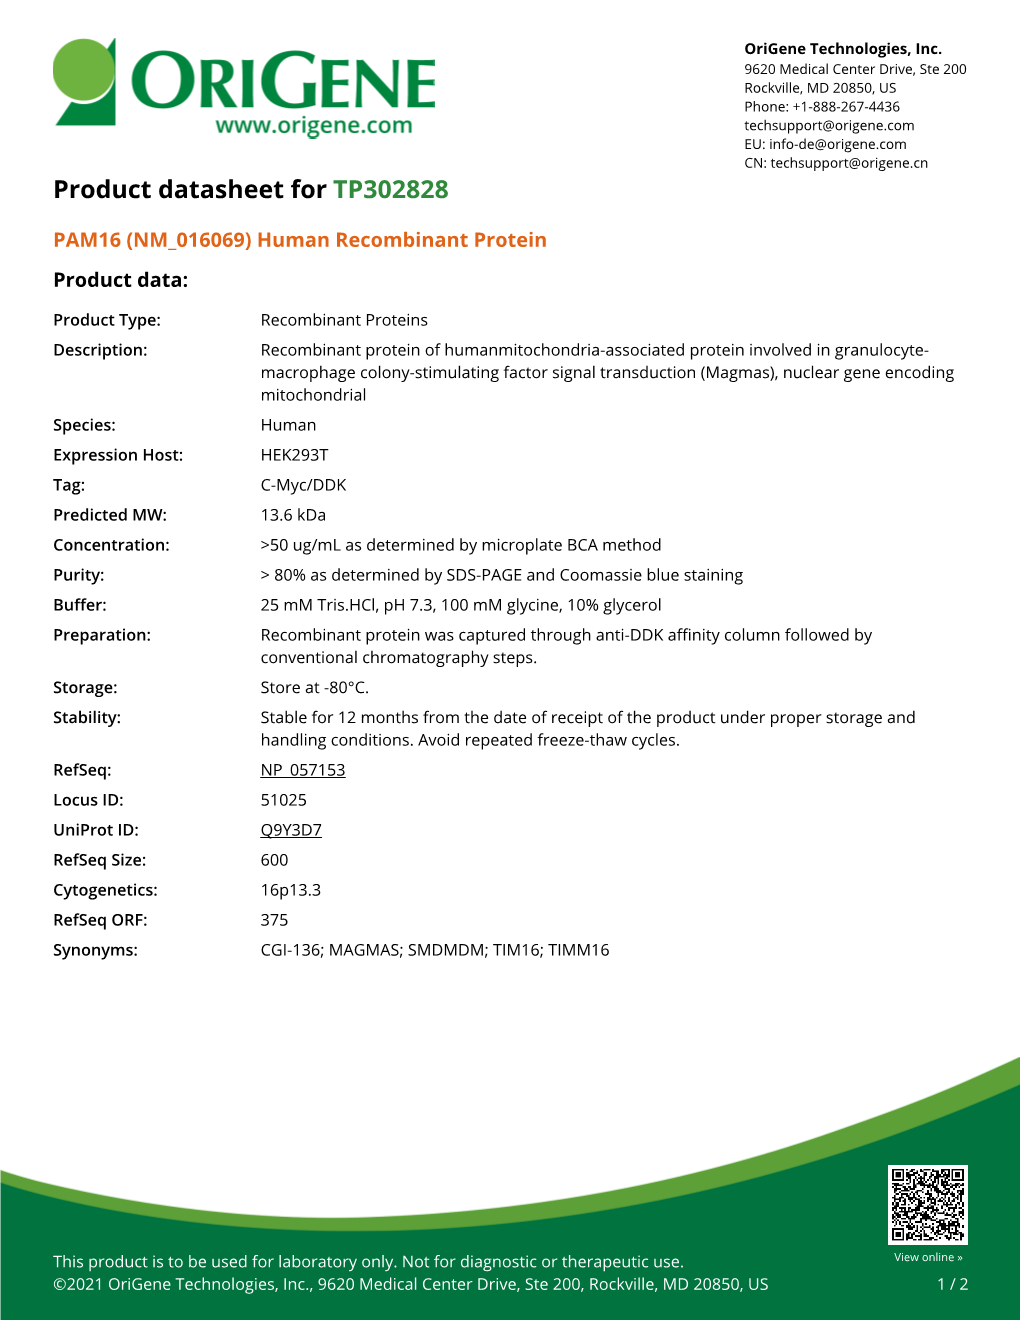 PAM16 (NM 016069) Human Recombinant Protein Product Data